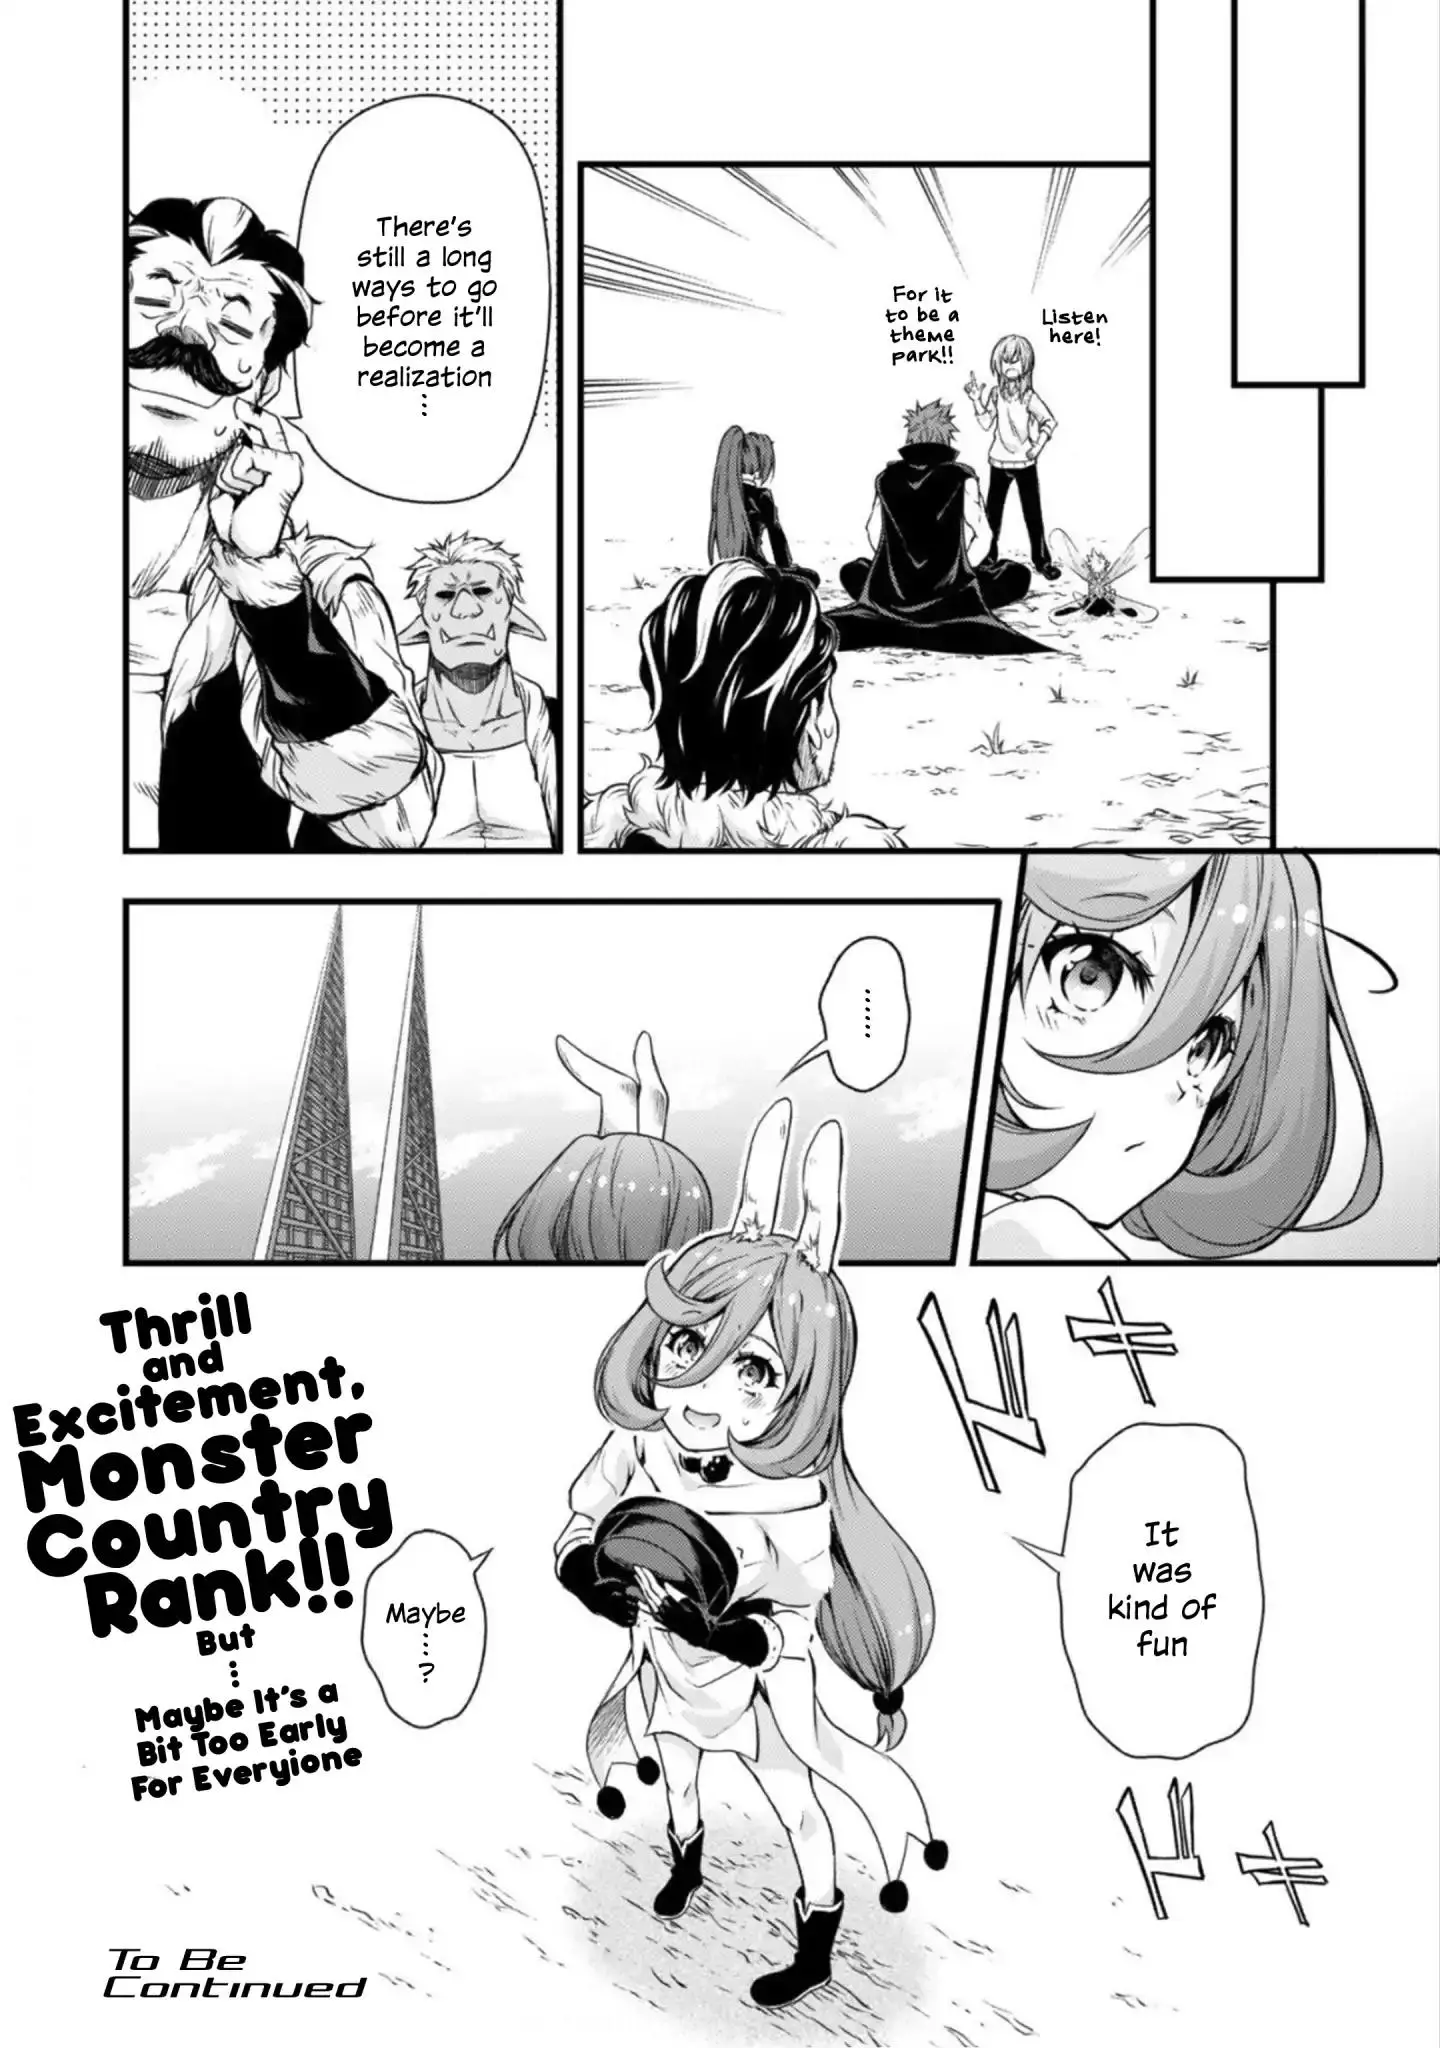 Tensei Shitara Slime Datta Ken: The Ways of Strolling in the Demon Country - 24 page 29